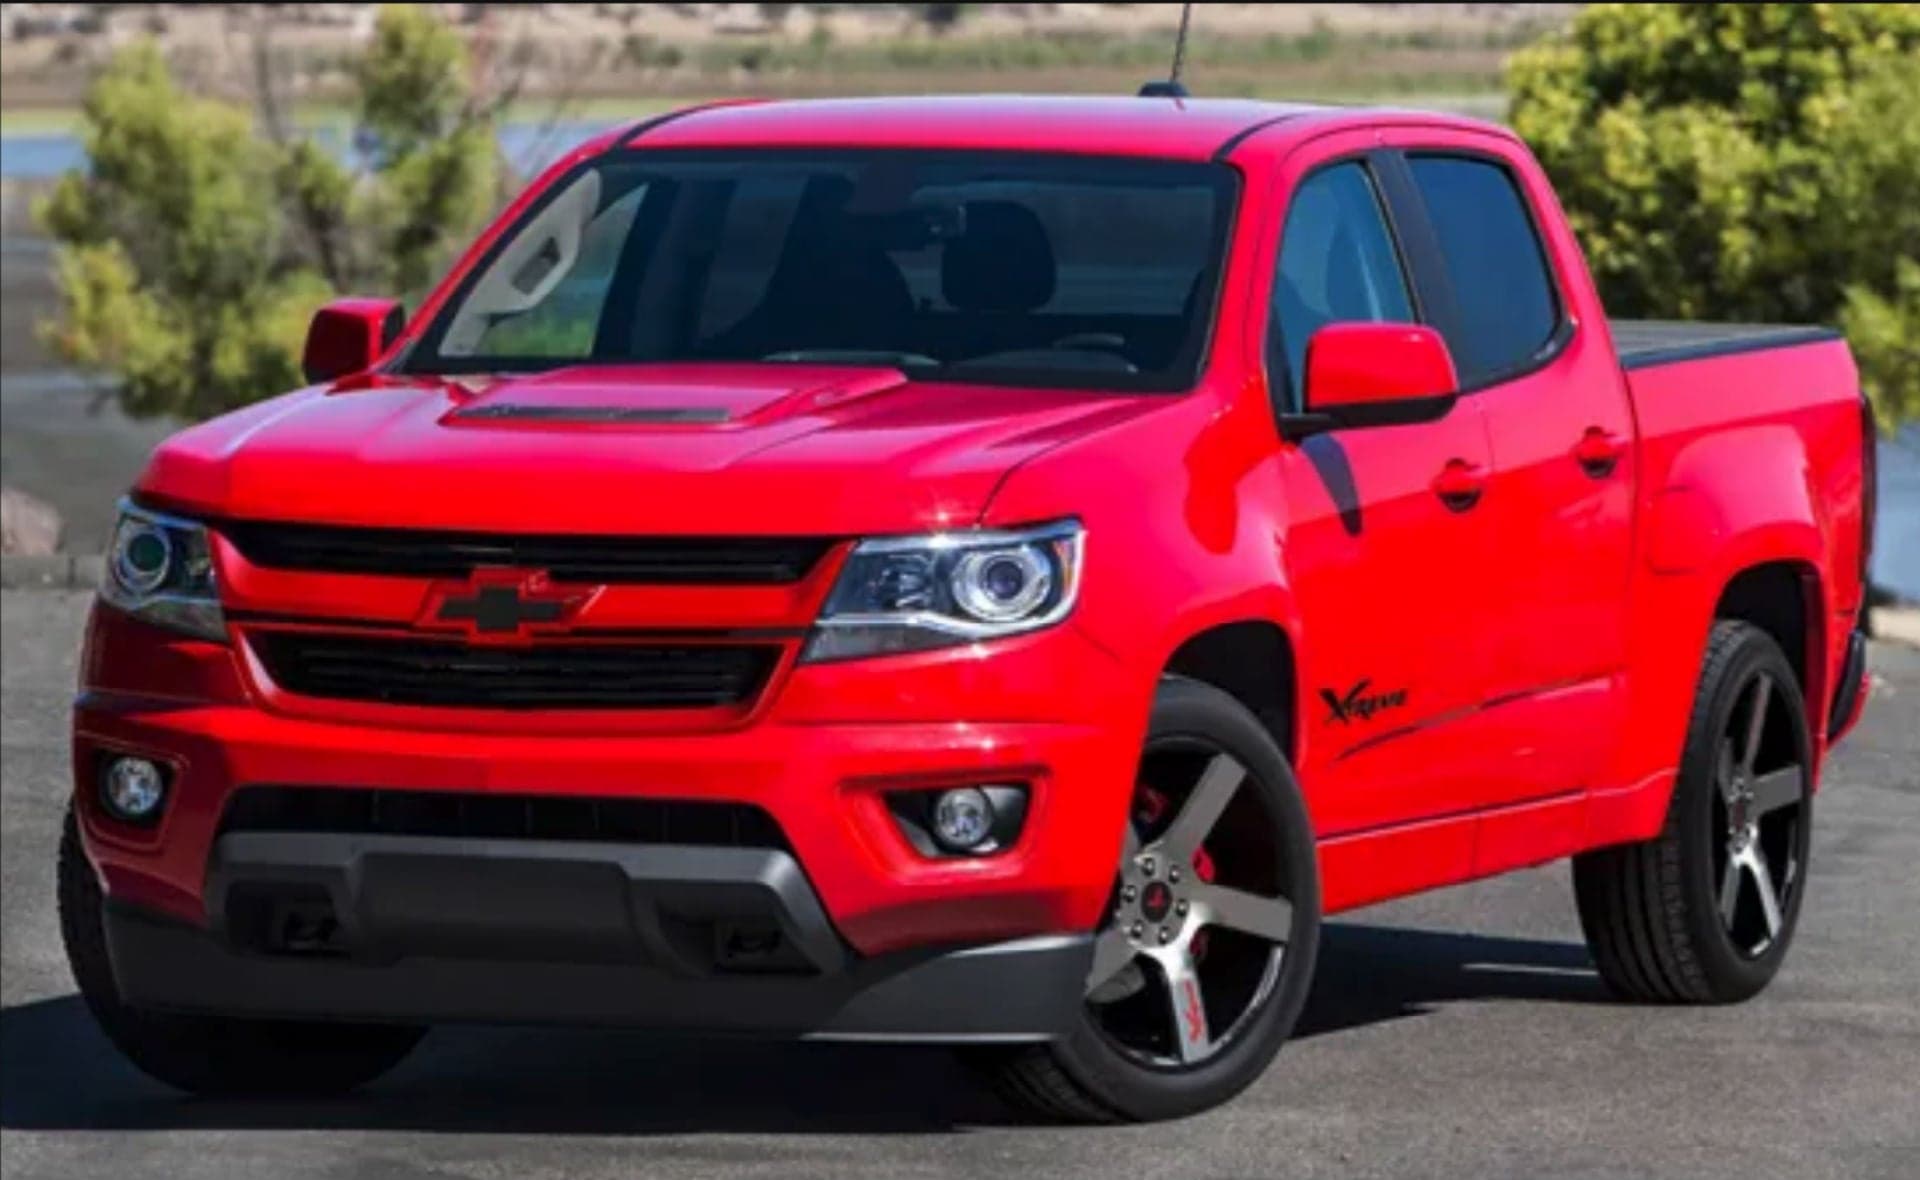 Supercharged, 455-HP Chevy Colorado Xtreme Is the Sport Truck GM Won’t Build